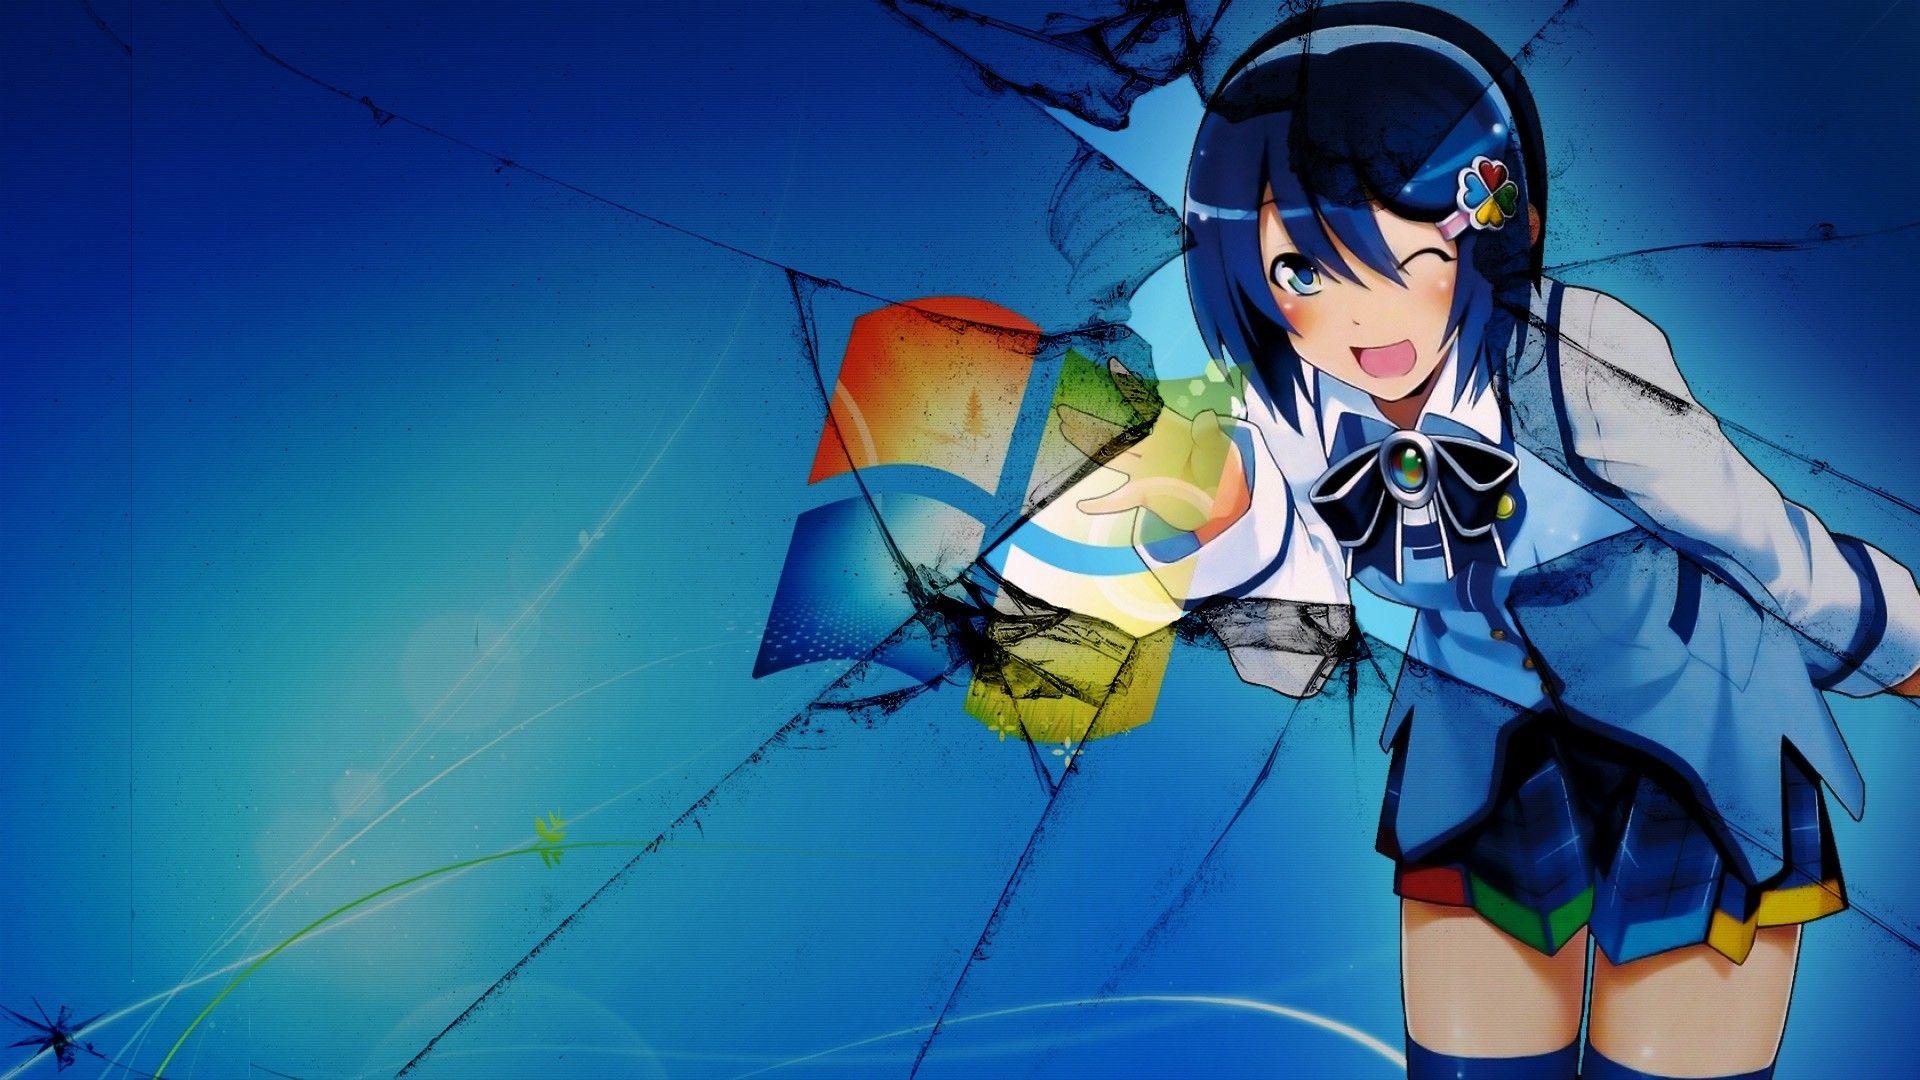 1920X1080 Anime Wallpapers - Top Free 1920X1080 Anime Backgrounds